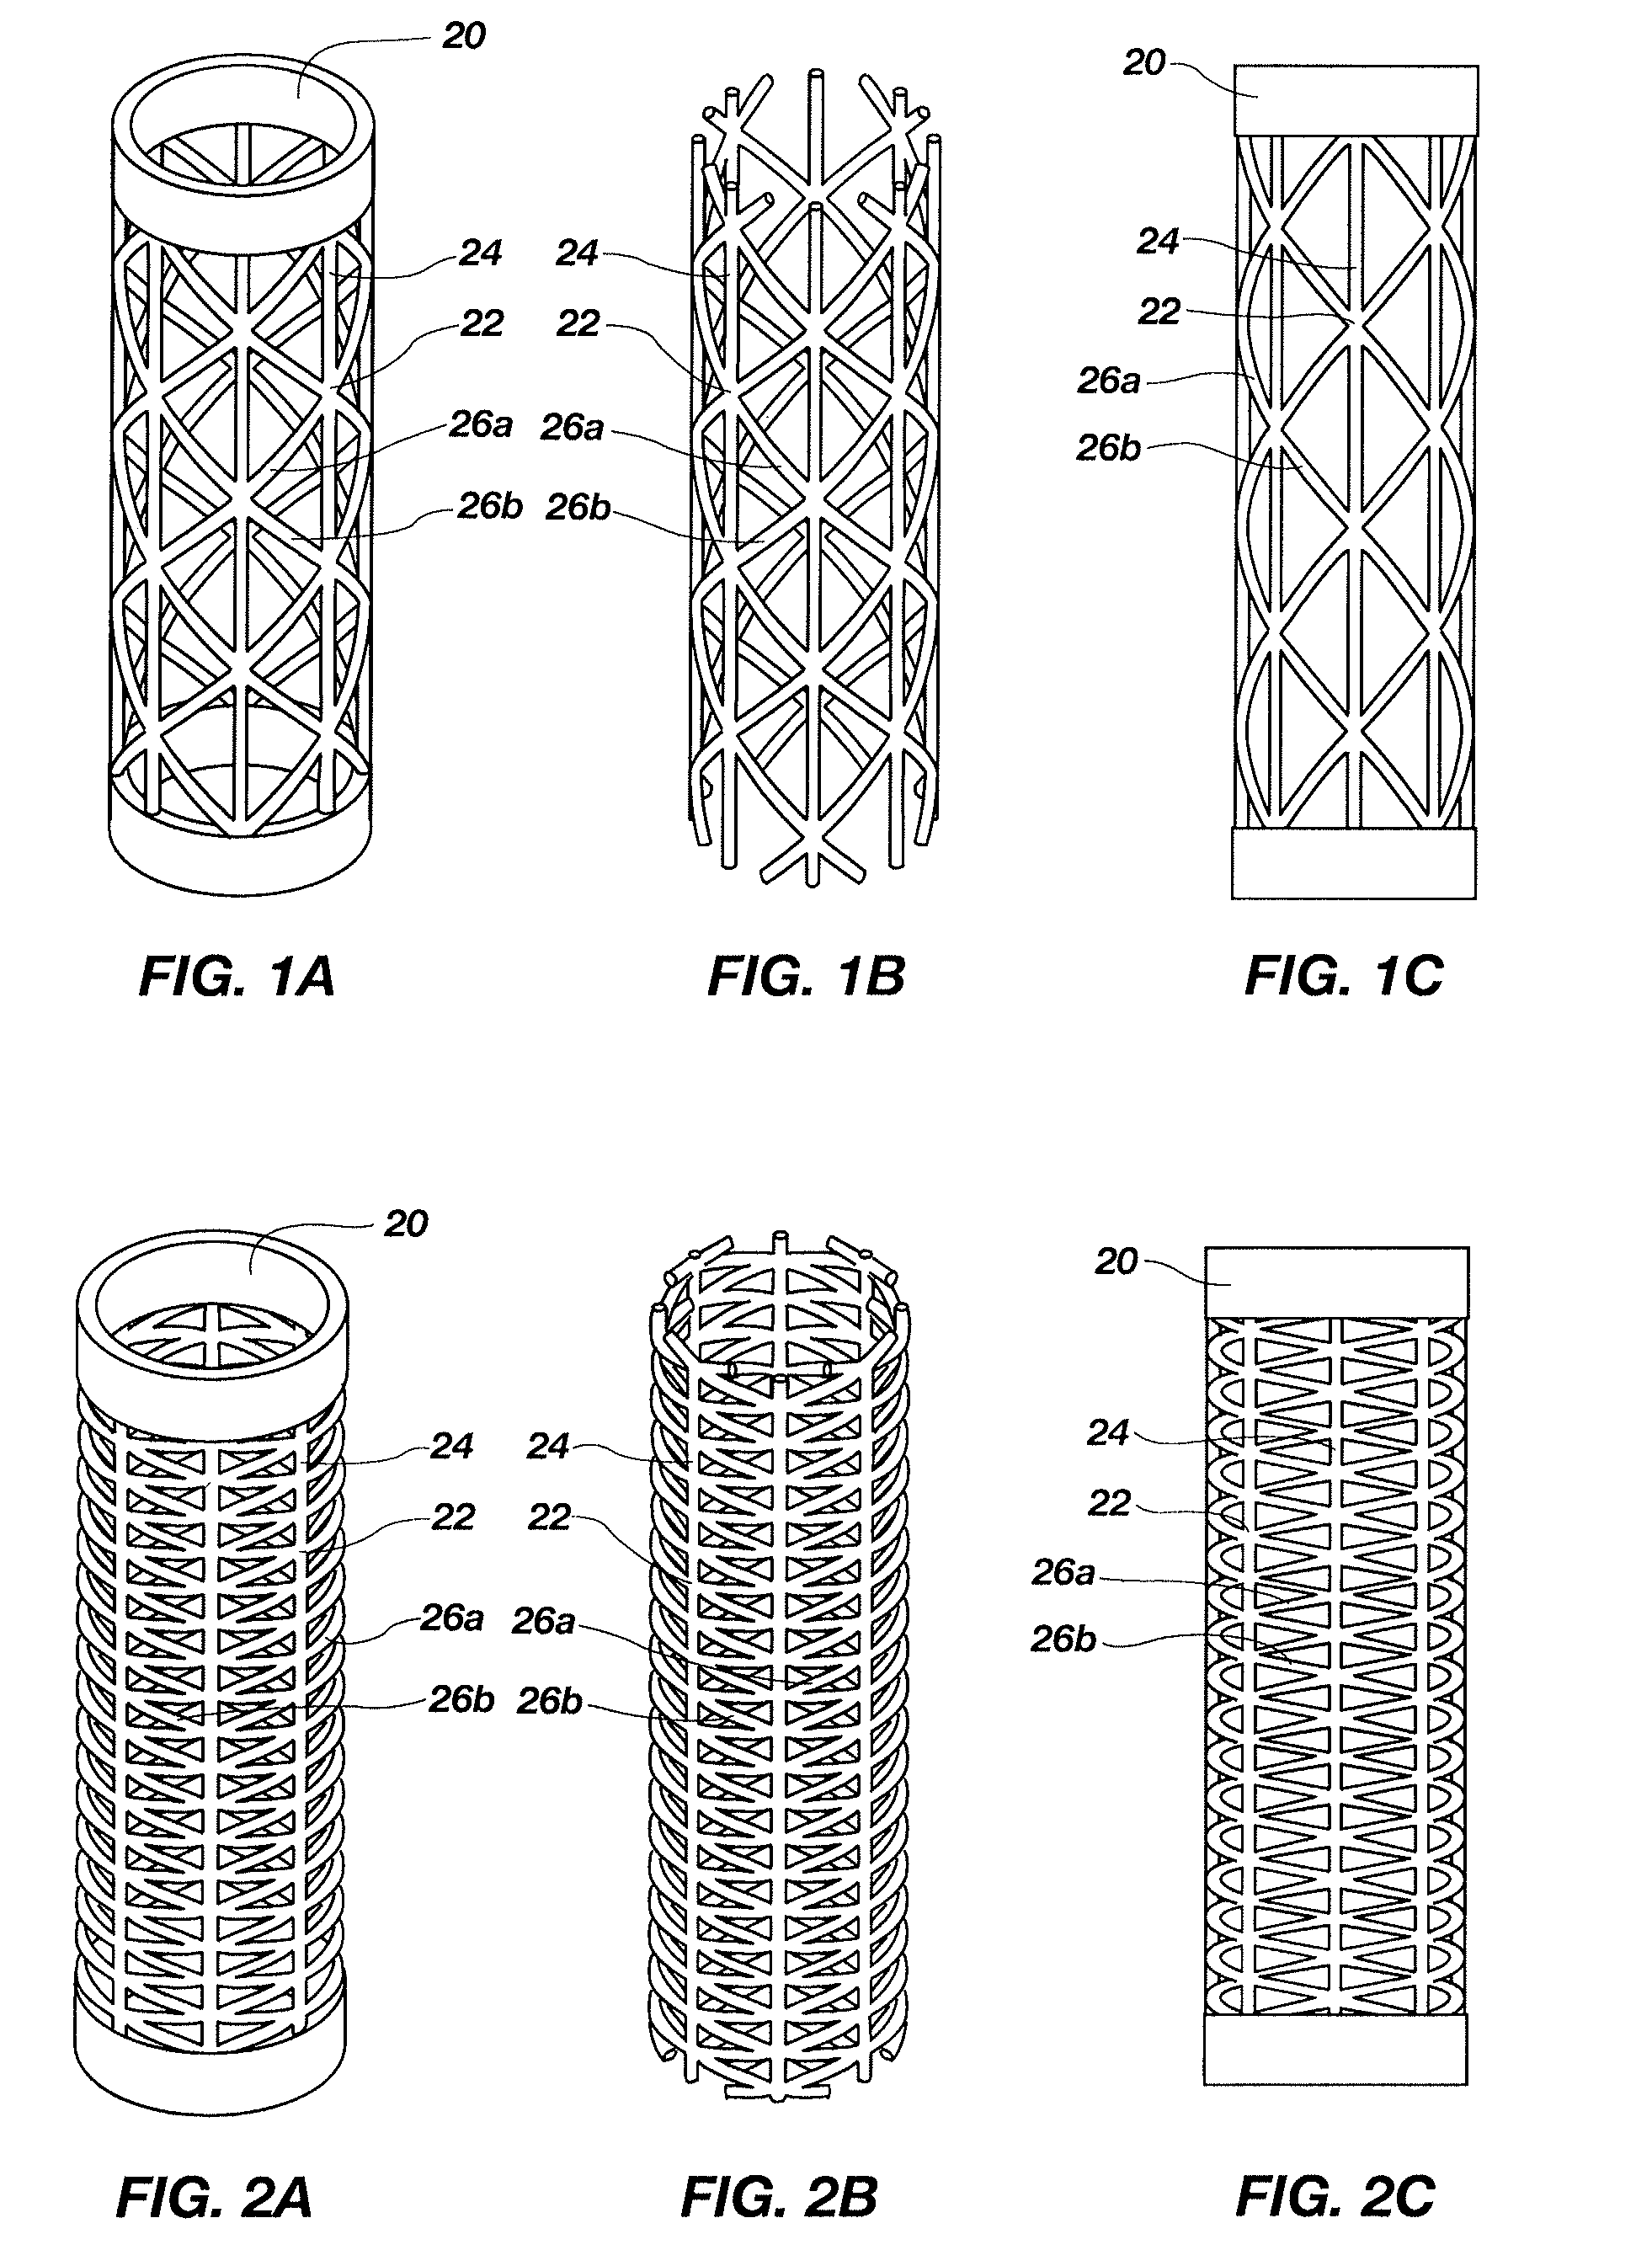 Method and system for forming composite geometric support structures